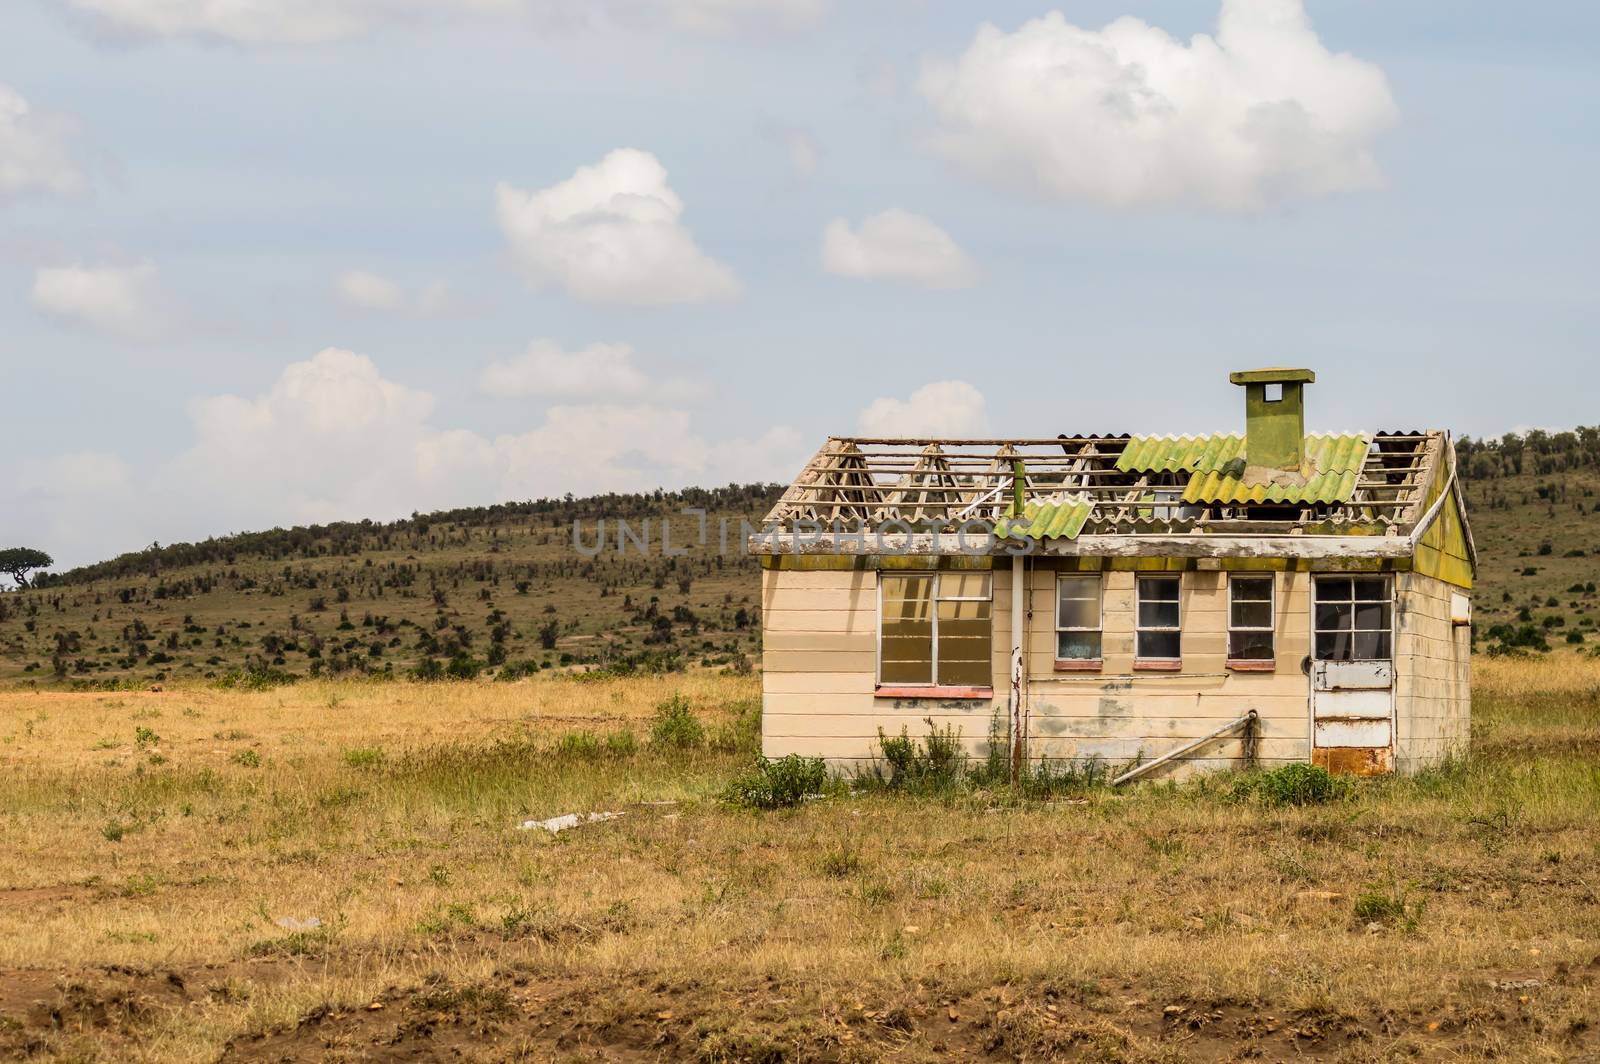 Abandoned House In The Savannah Of Masai Mara Park  by Philou1000